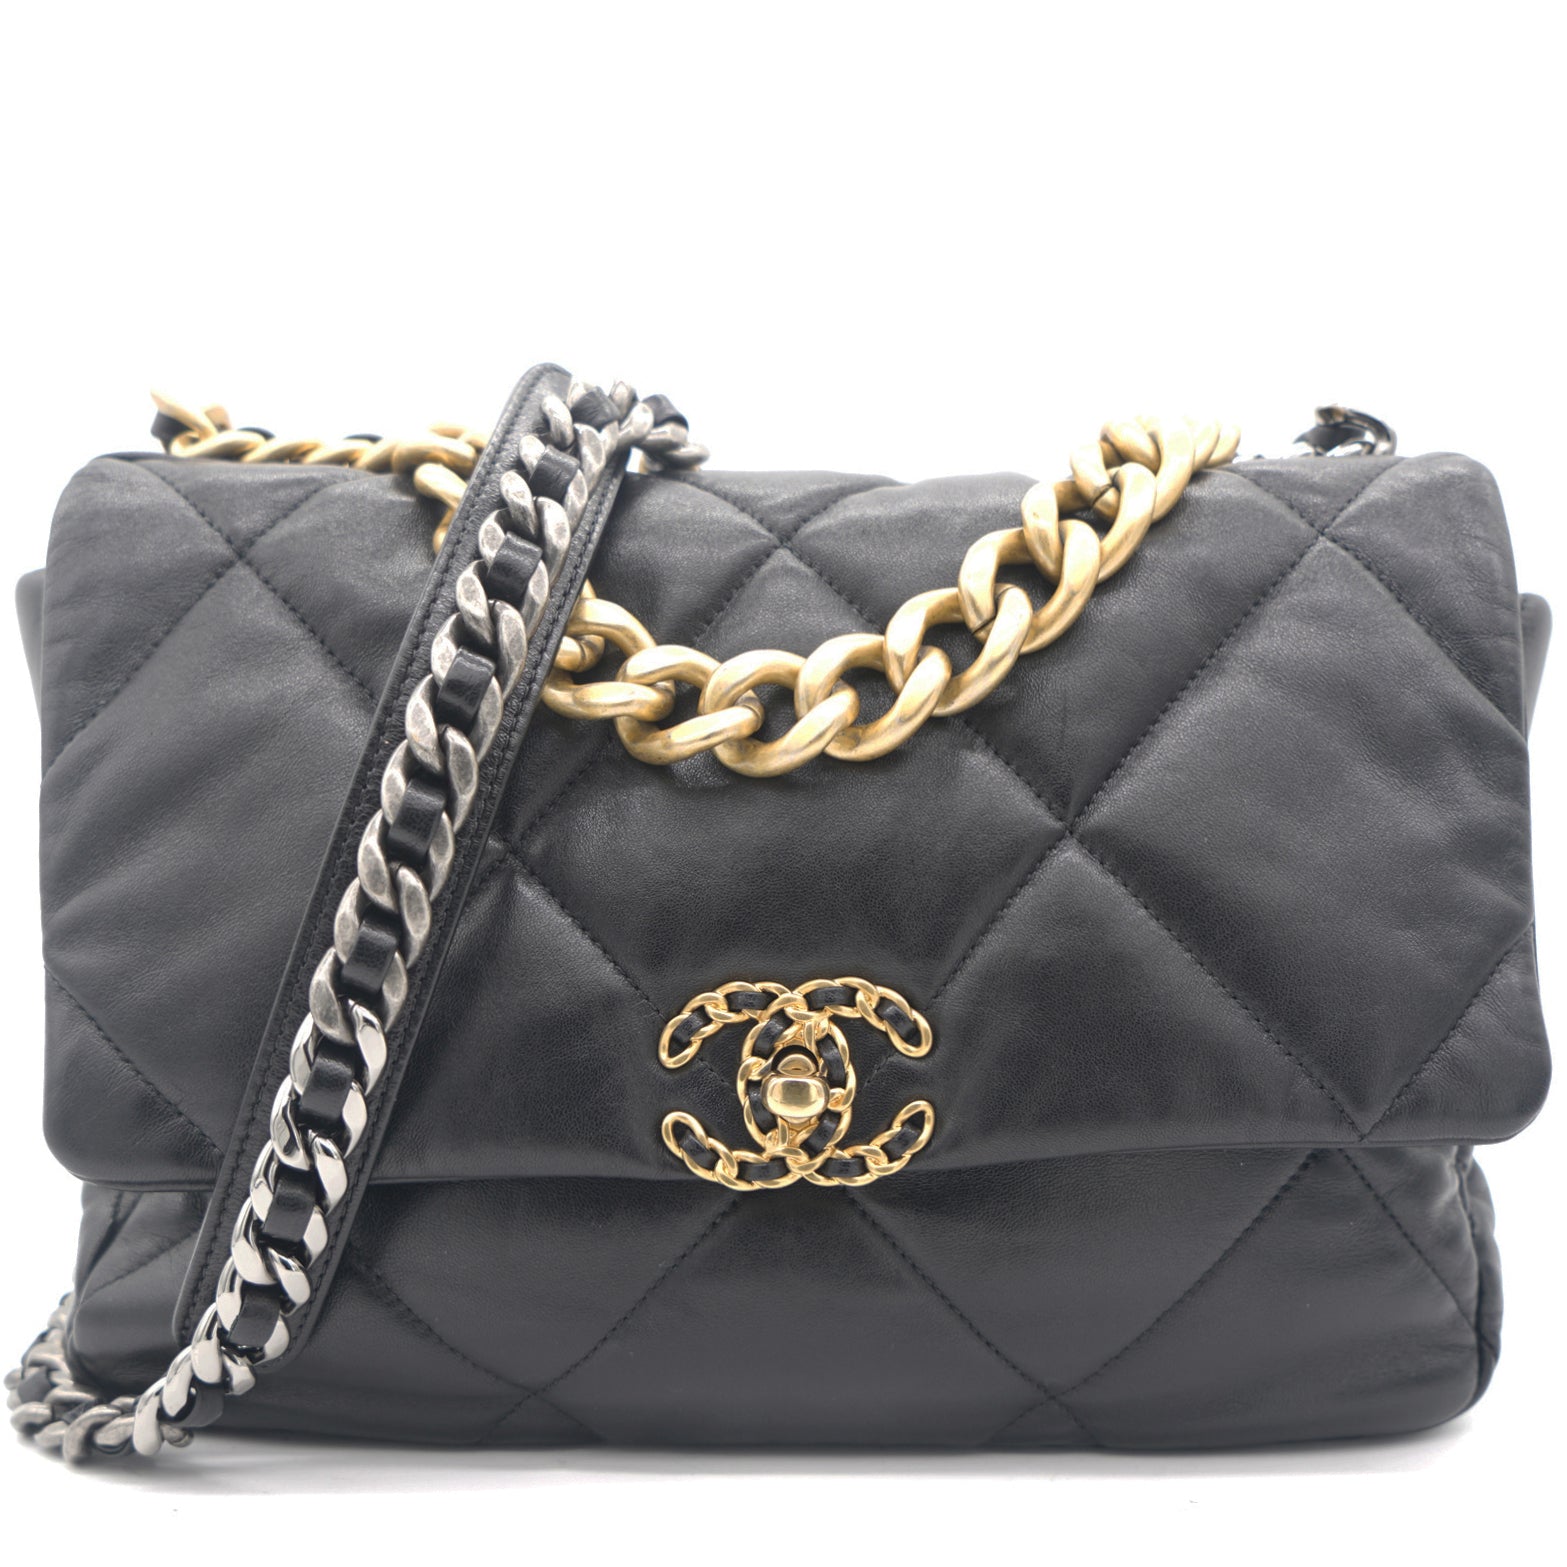 Chanel 19 Large Flap Bag in Grey Lambskin with Tricolore Hardware - SOLD